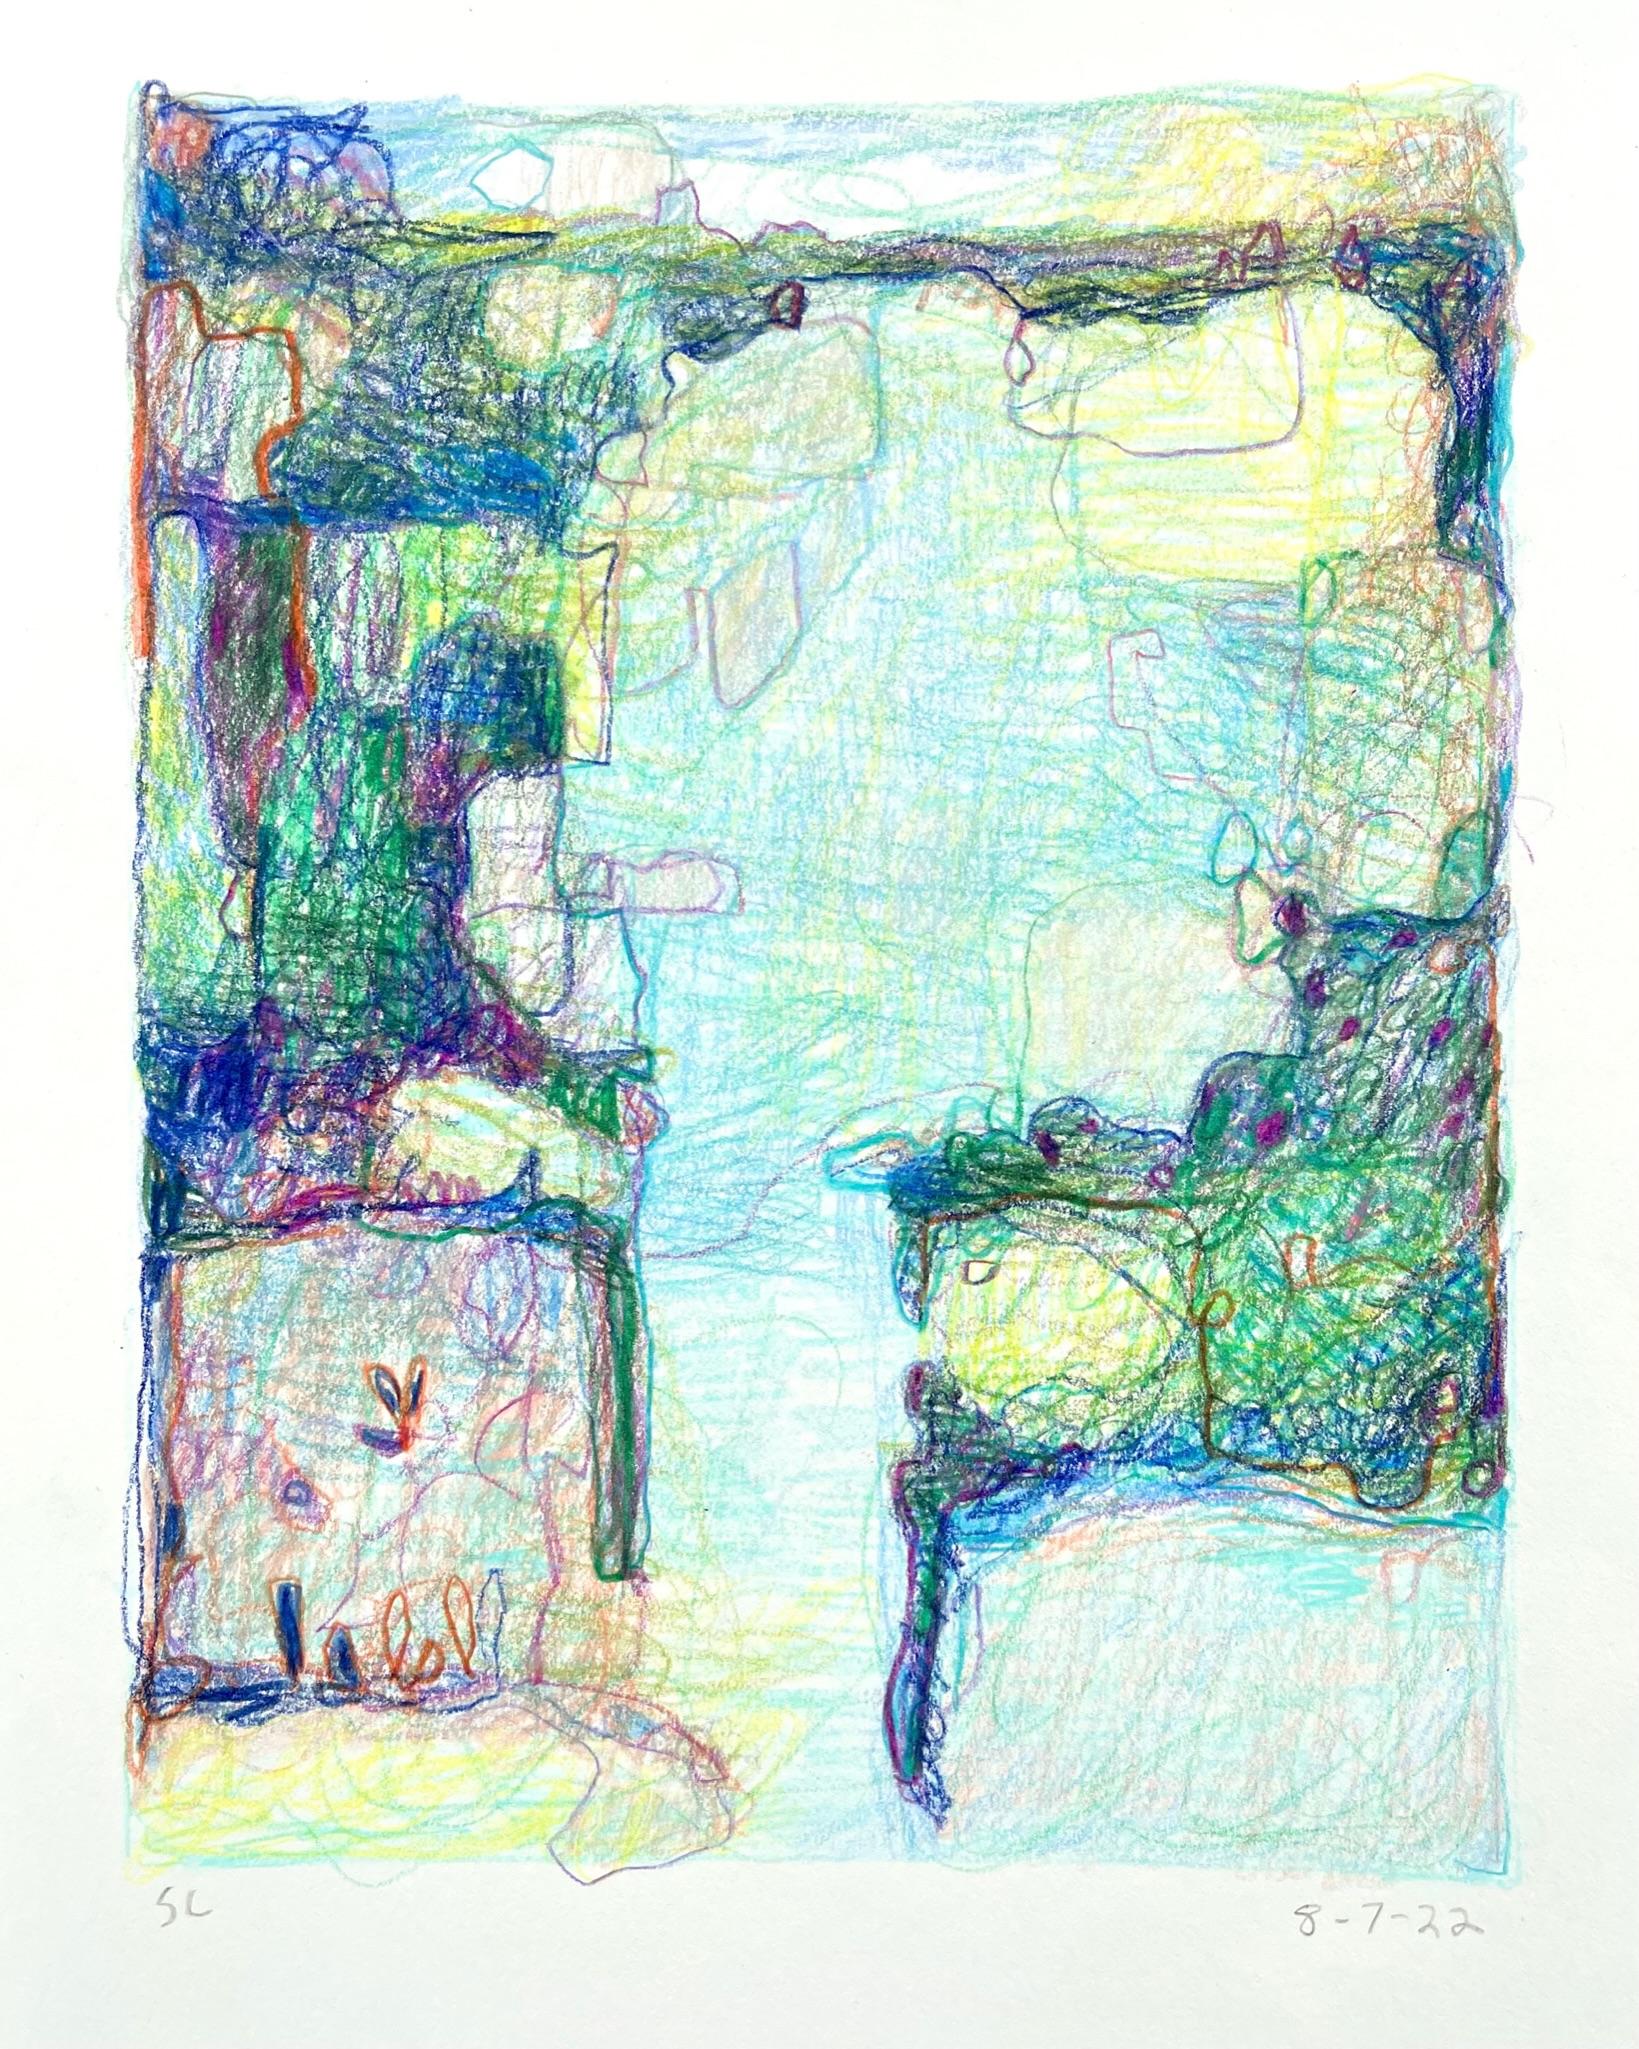 Sandy Litchfield Abstract Drawing - 8-7-22, Impressionist, abstracted landscape drawing with colored pencil